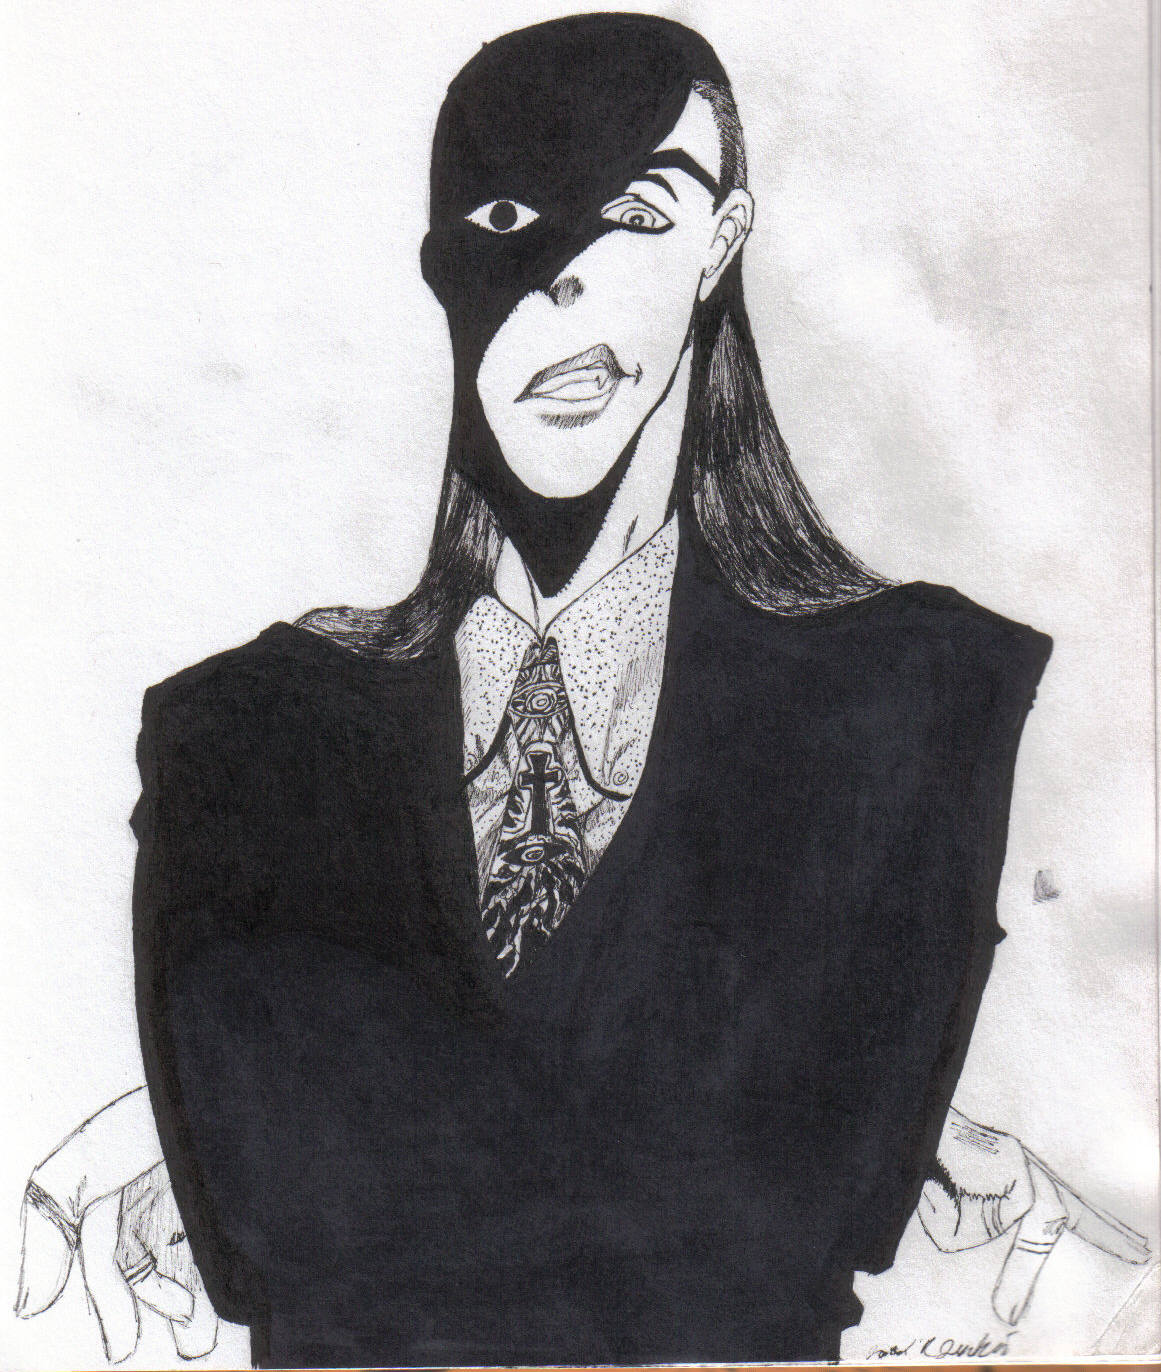 Alucard (in his black suit and trippy tie) by Kit_wit_issues